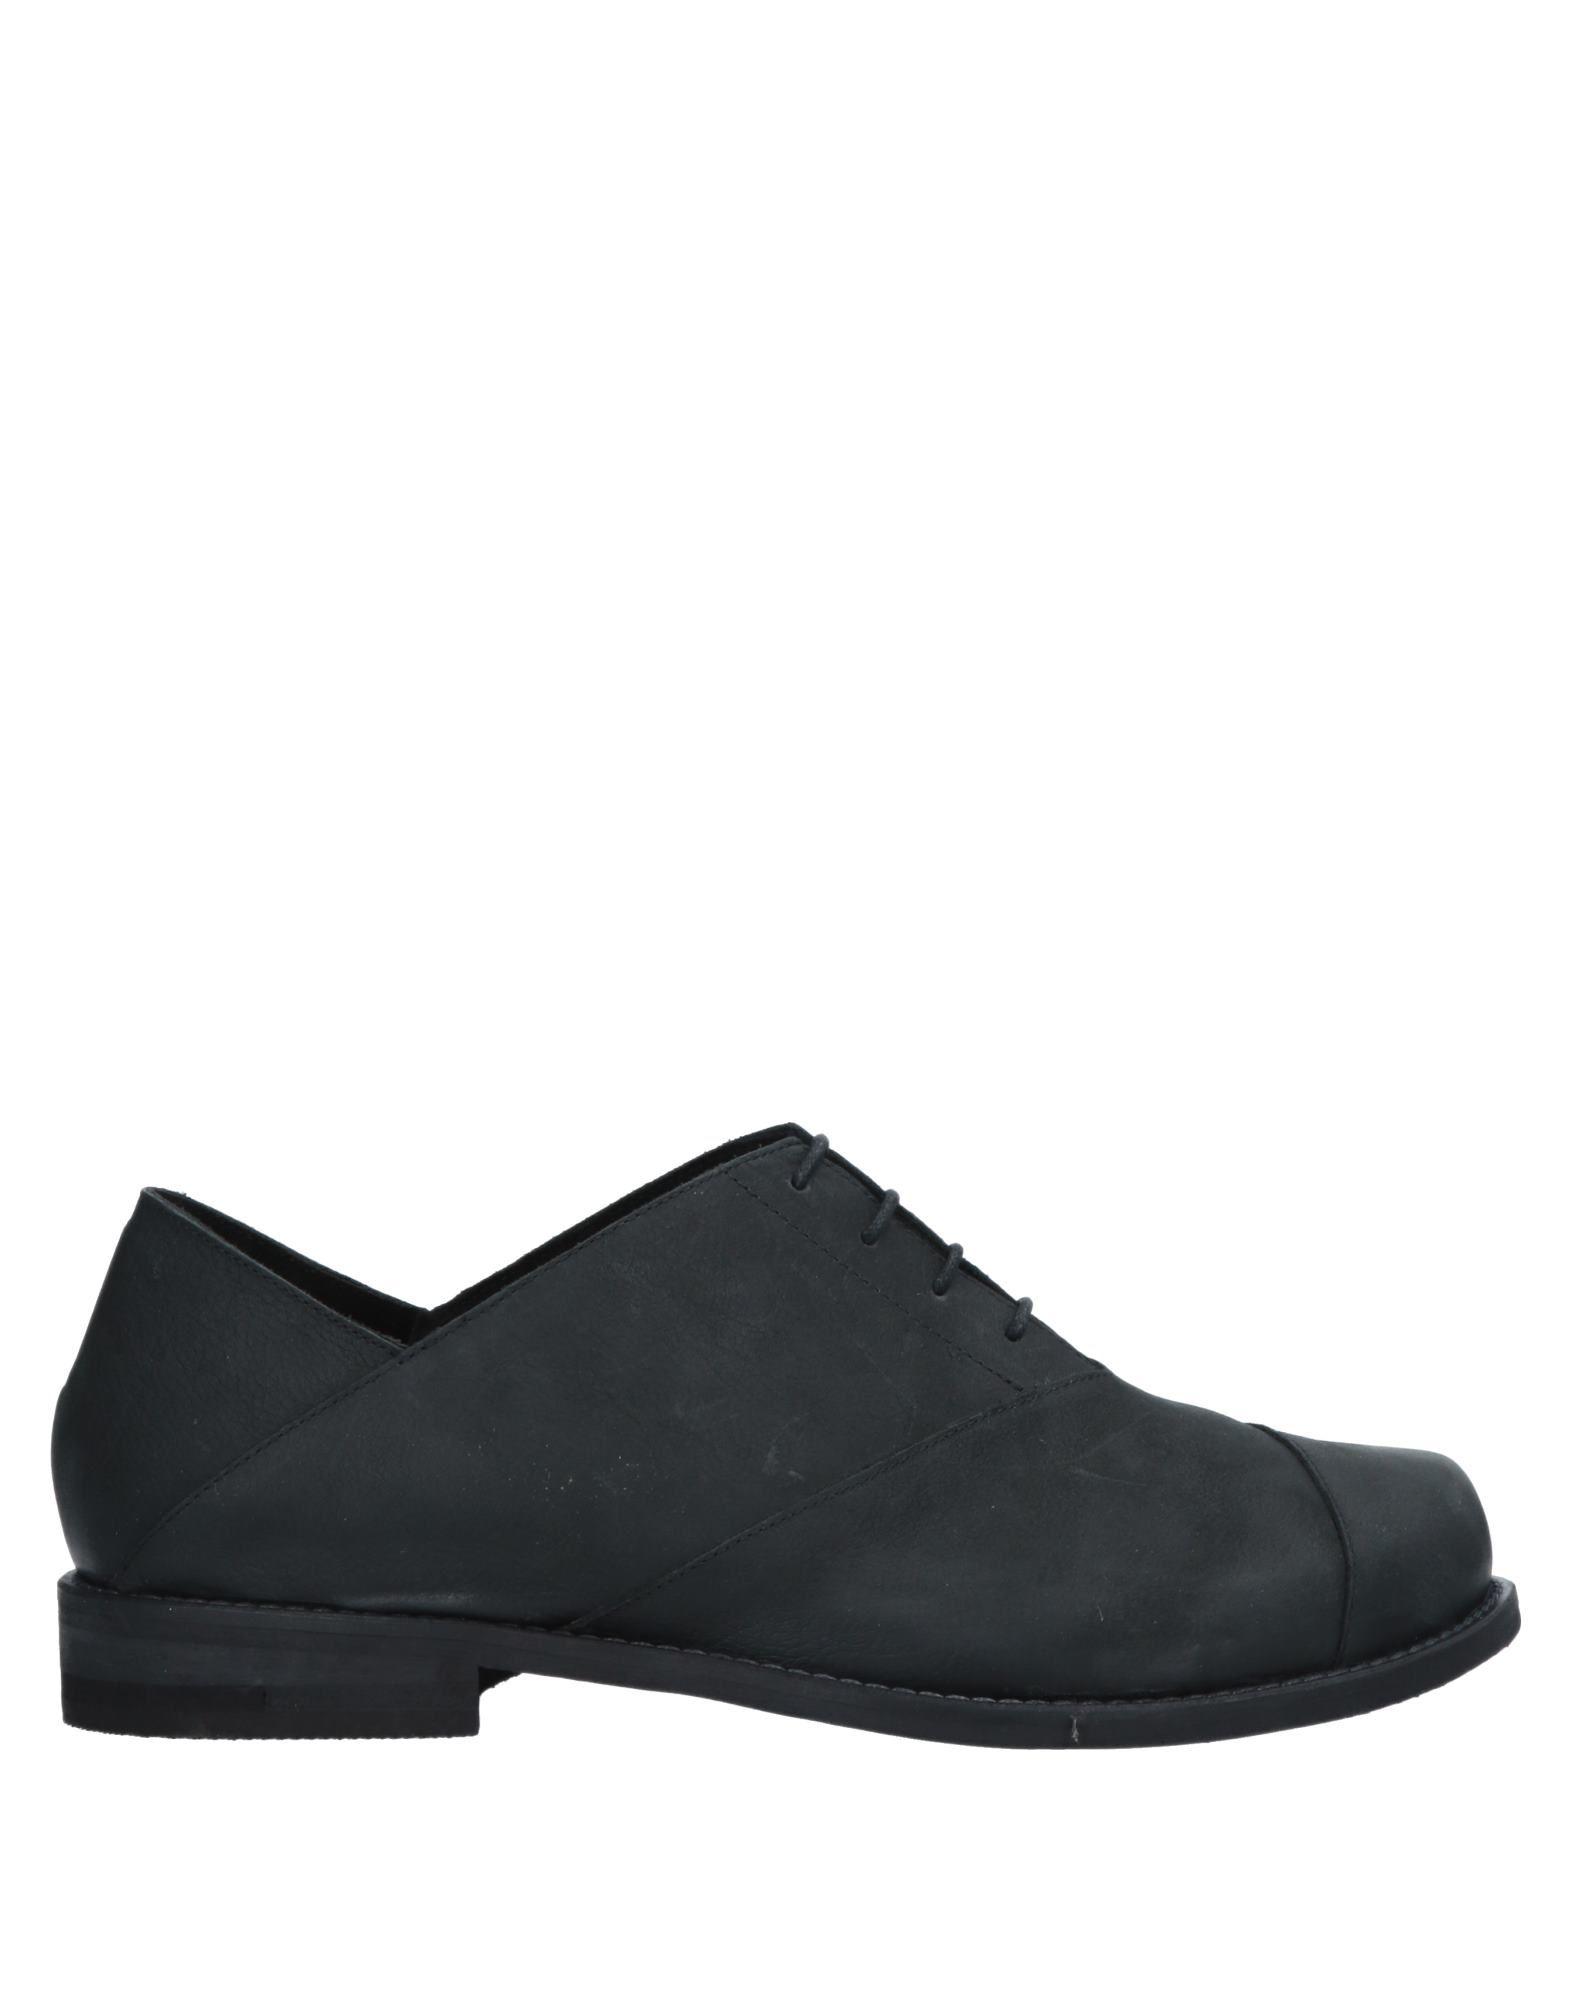 Peter Non Leather Lace-up Shoe in Black for Men - Lyst